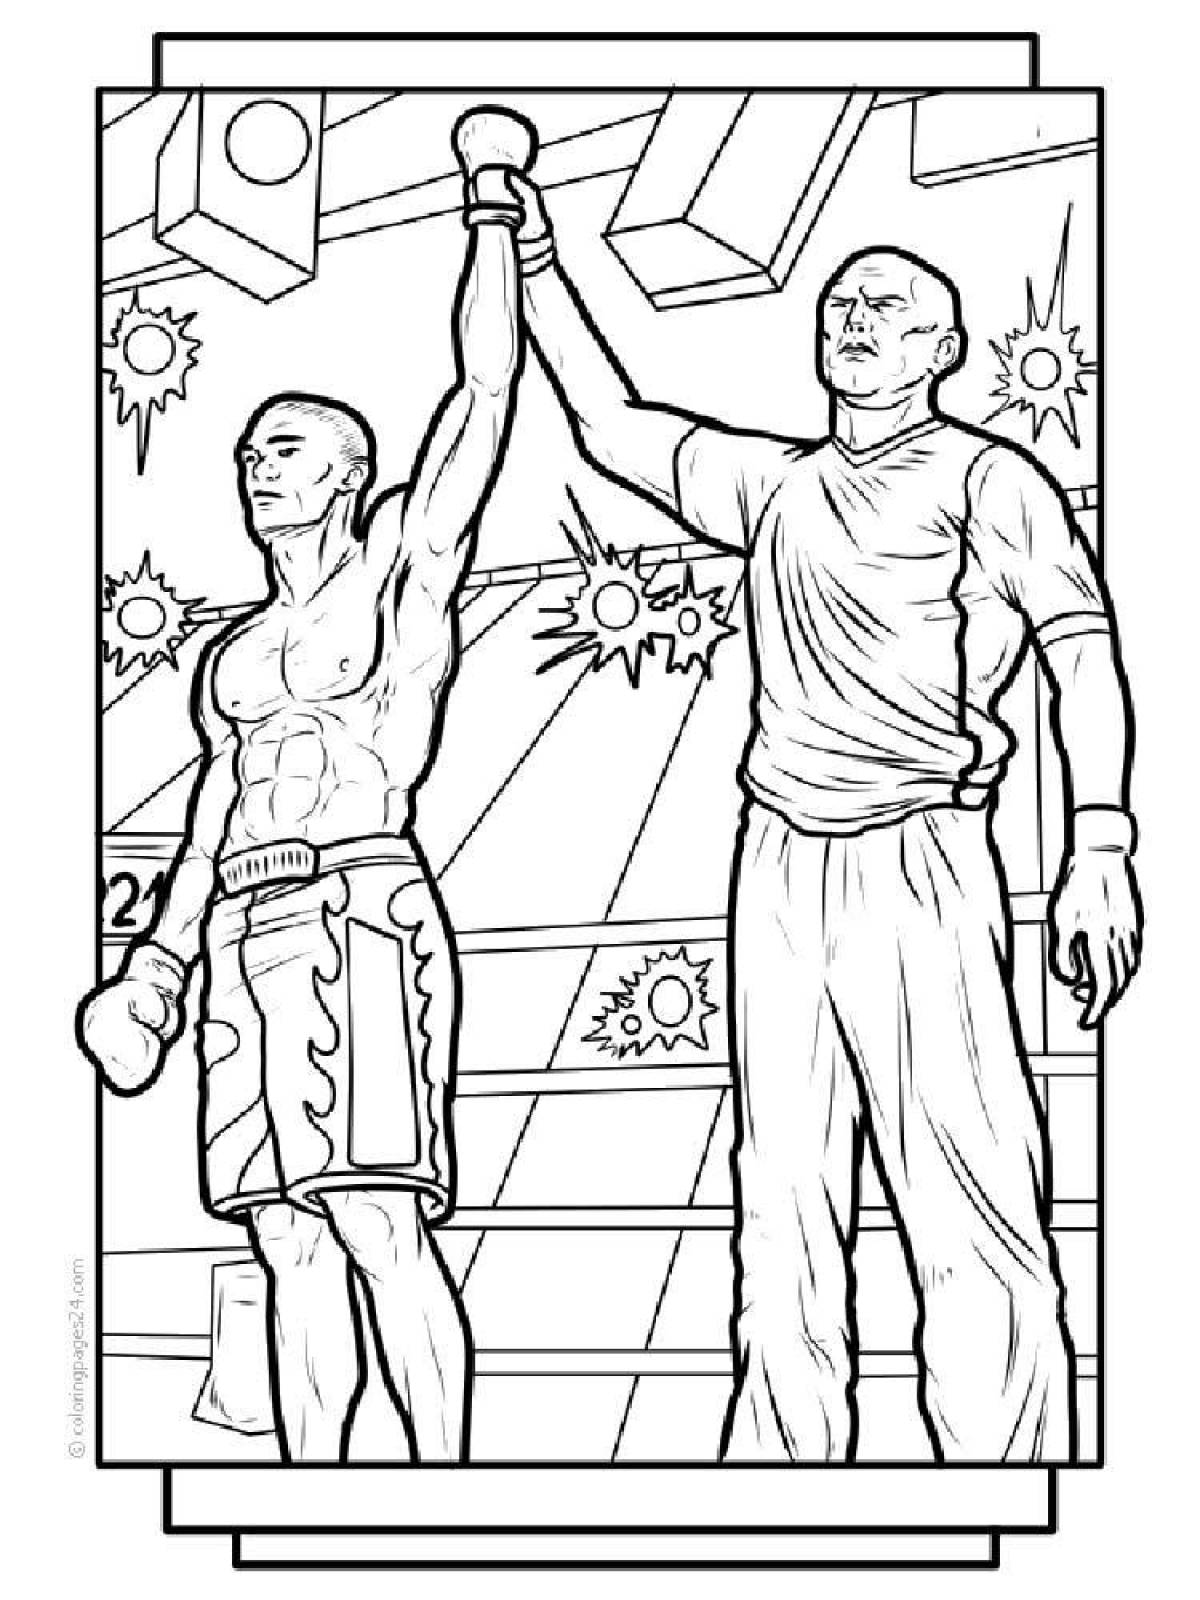 Fun boxing and boo coloring page